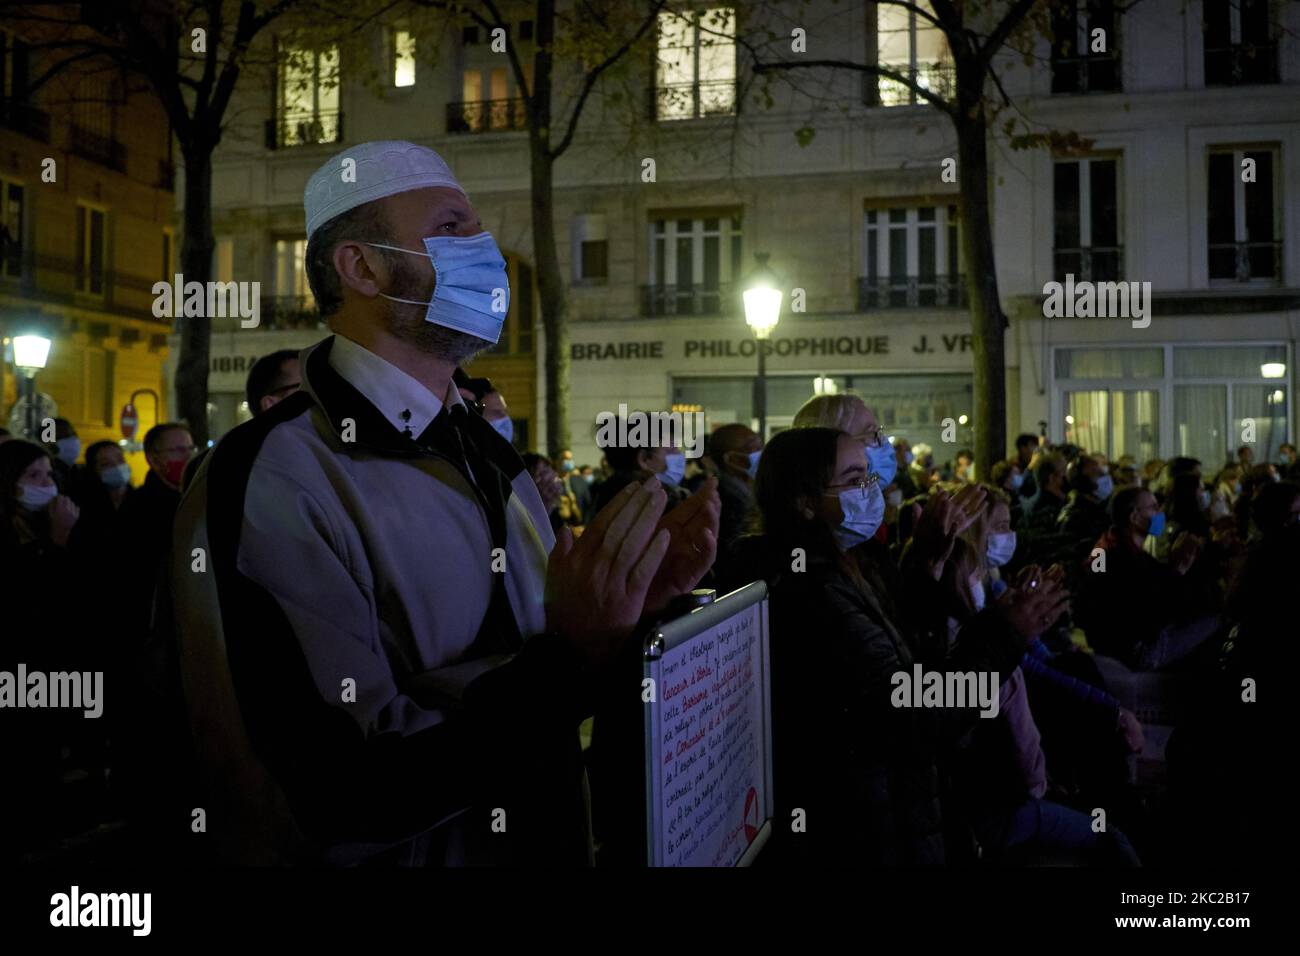 People gathered on the Place de la Sorbonne in Paris on October 21, 2020, to watch a live broadcast on a giant screen of the national tribute to the french teacher Samuel Paty, a teacher at the College du Bois d'Aulne in Conflans-Sainte-Honorine, who was beheaded by an islamist. Samuel Paty was killed for having shown caricatures of the Prophet Mohammed published by Charlie Hebdo to his pupils during a course on freedom of expression. (Photo by Adnan Farzat/NurPhoto) Stock Photo